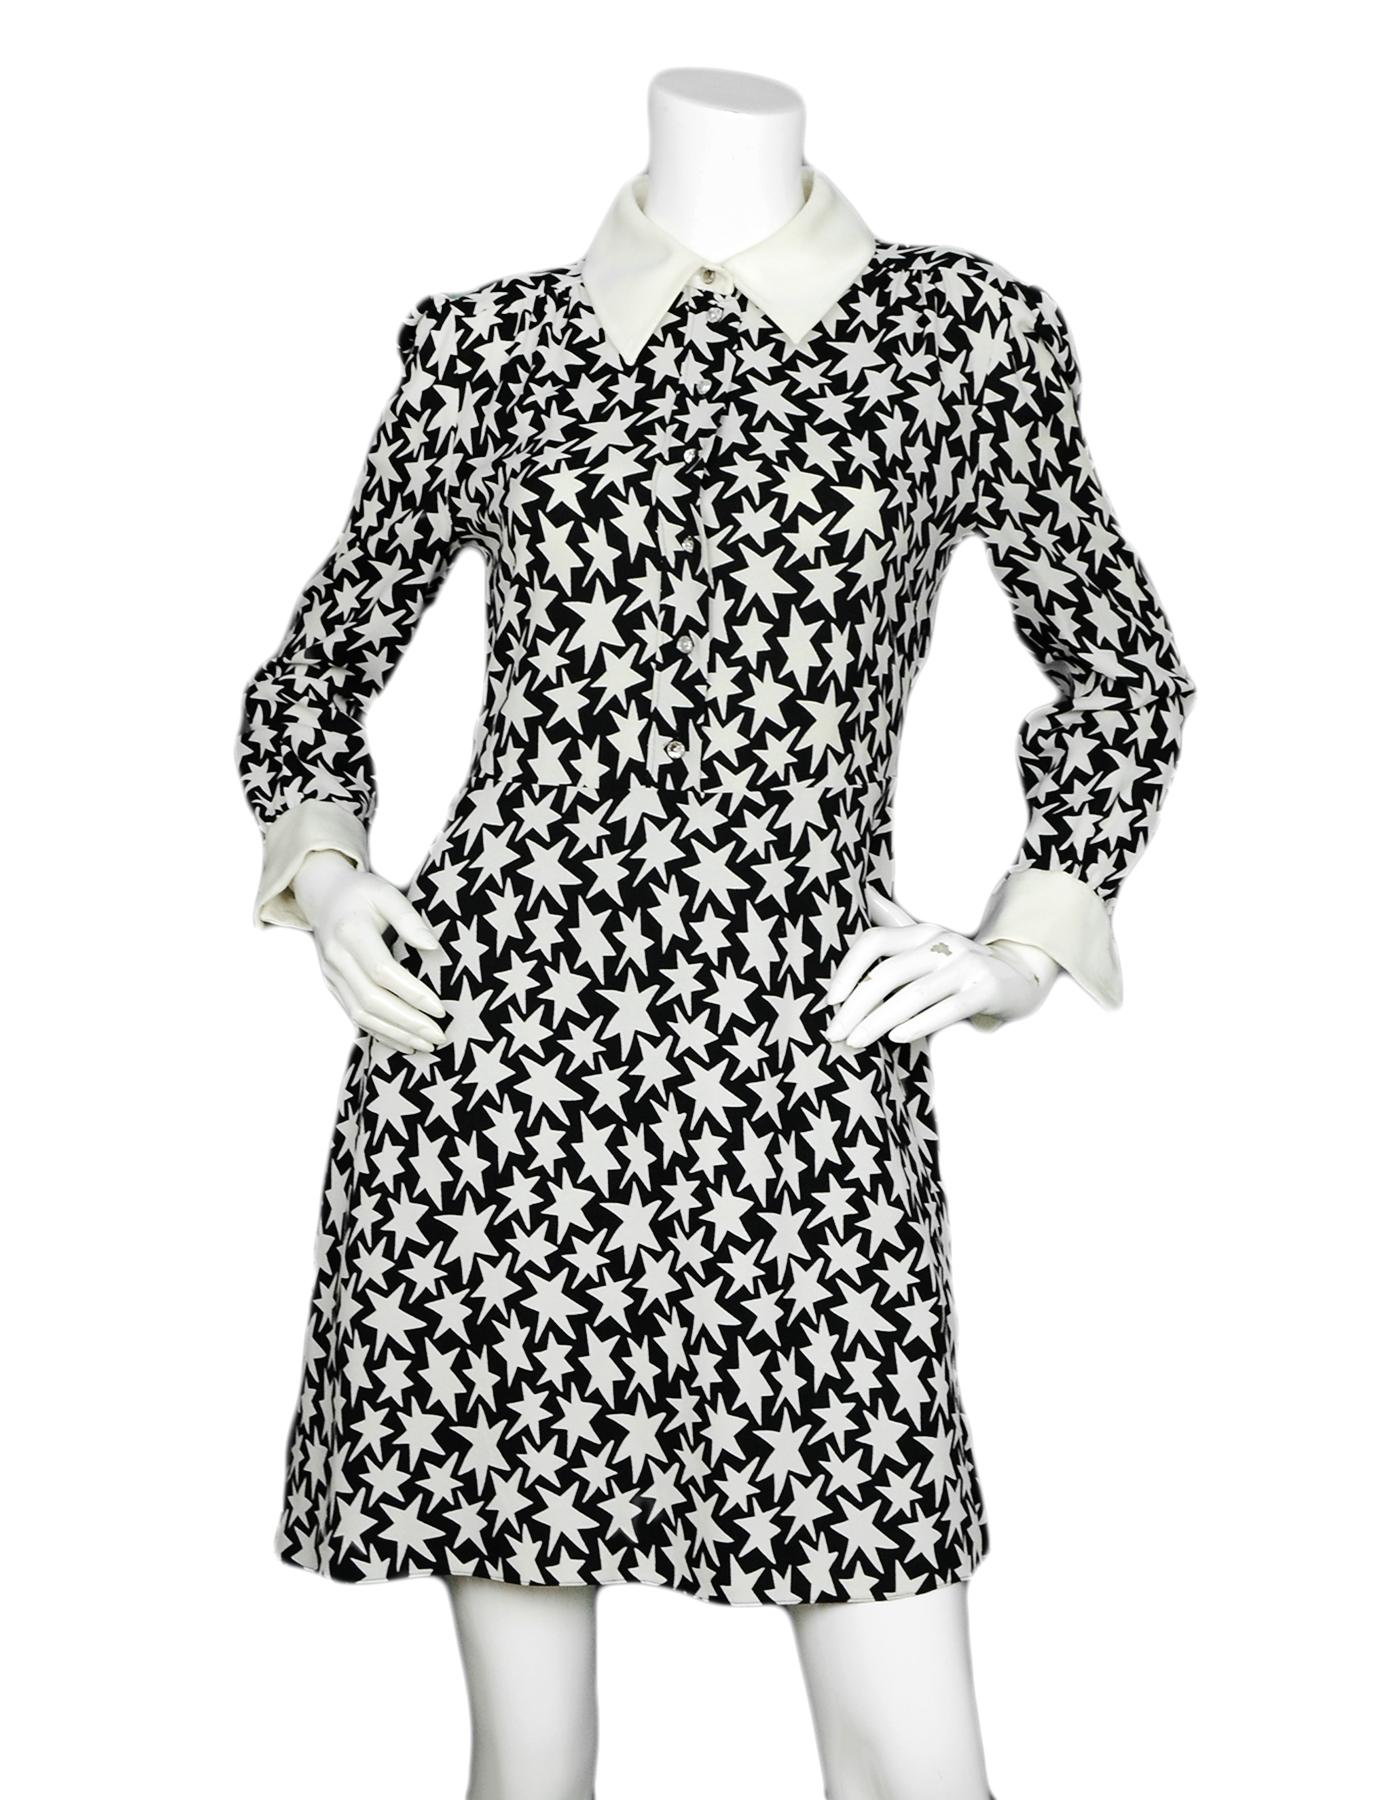 Saint Laurent Black/Off-White Star Print Schoolgirl Collar Dress sz 8

Made In: Italy
Color: Black, Off-white
Materials: 100% Viscose, 100% Silk (Collar)
Lining: 100% Silk
Opening/Closure: Front Buttons
Overall Condition: Excellent pre-owned